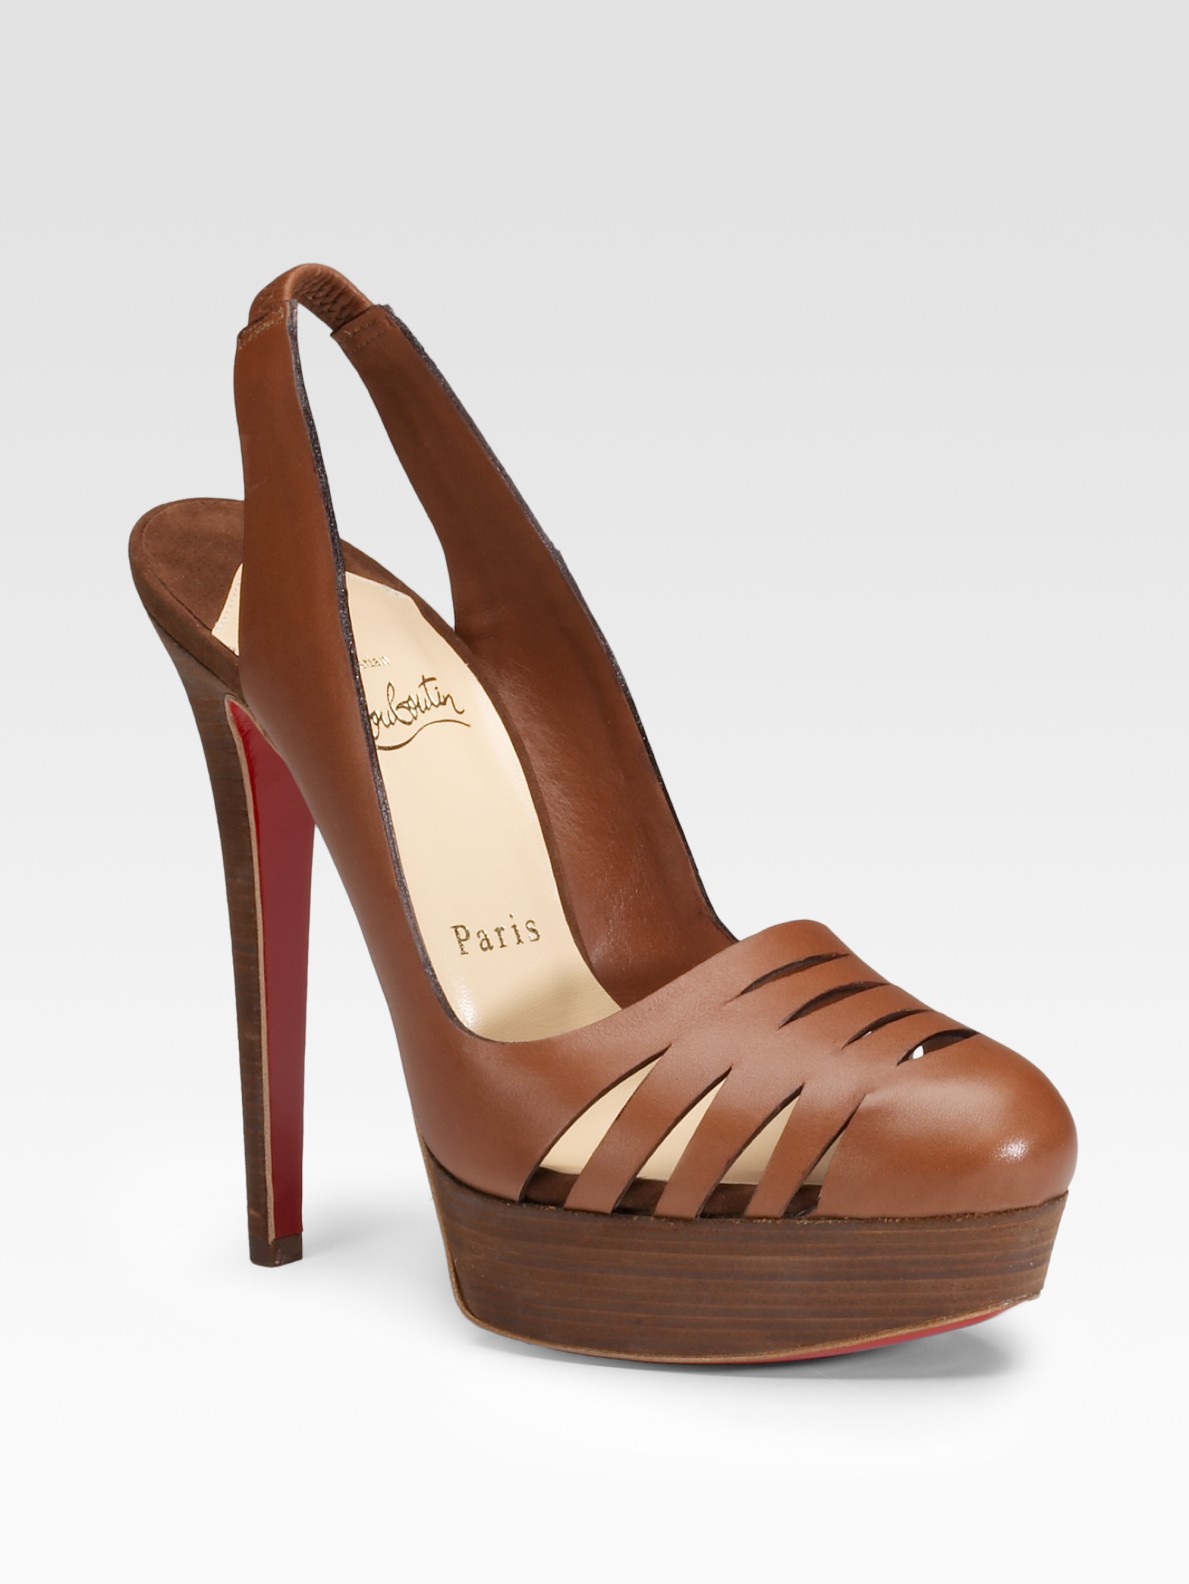 Lyst - Christian Louboutin Laser-cut Leather Slingbacks in Brown